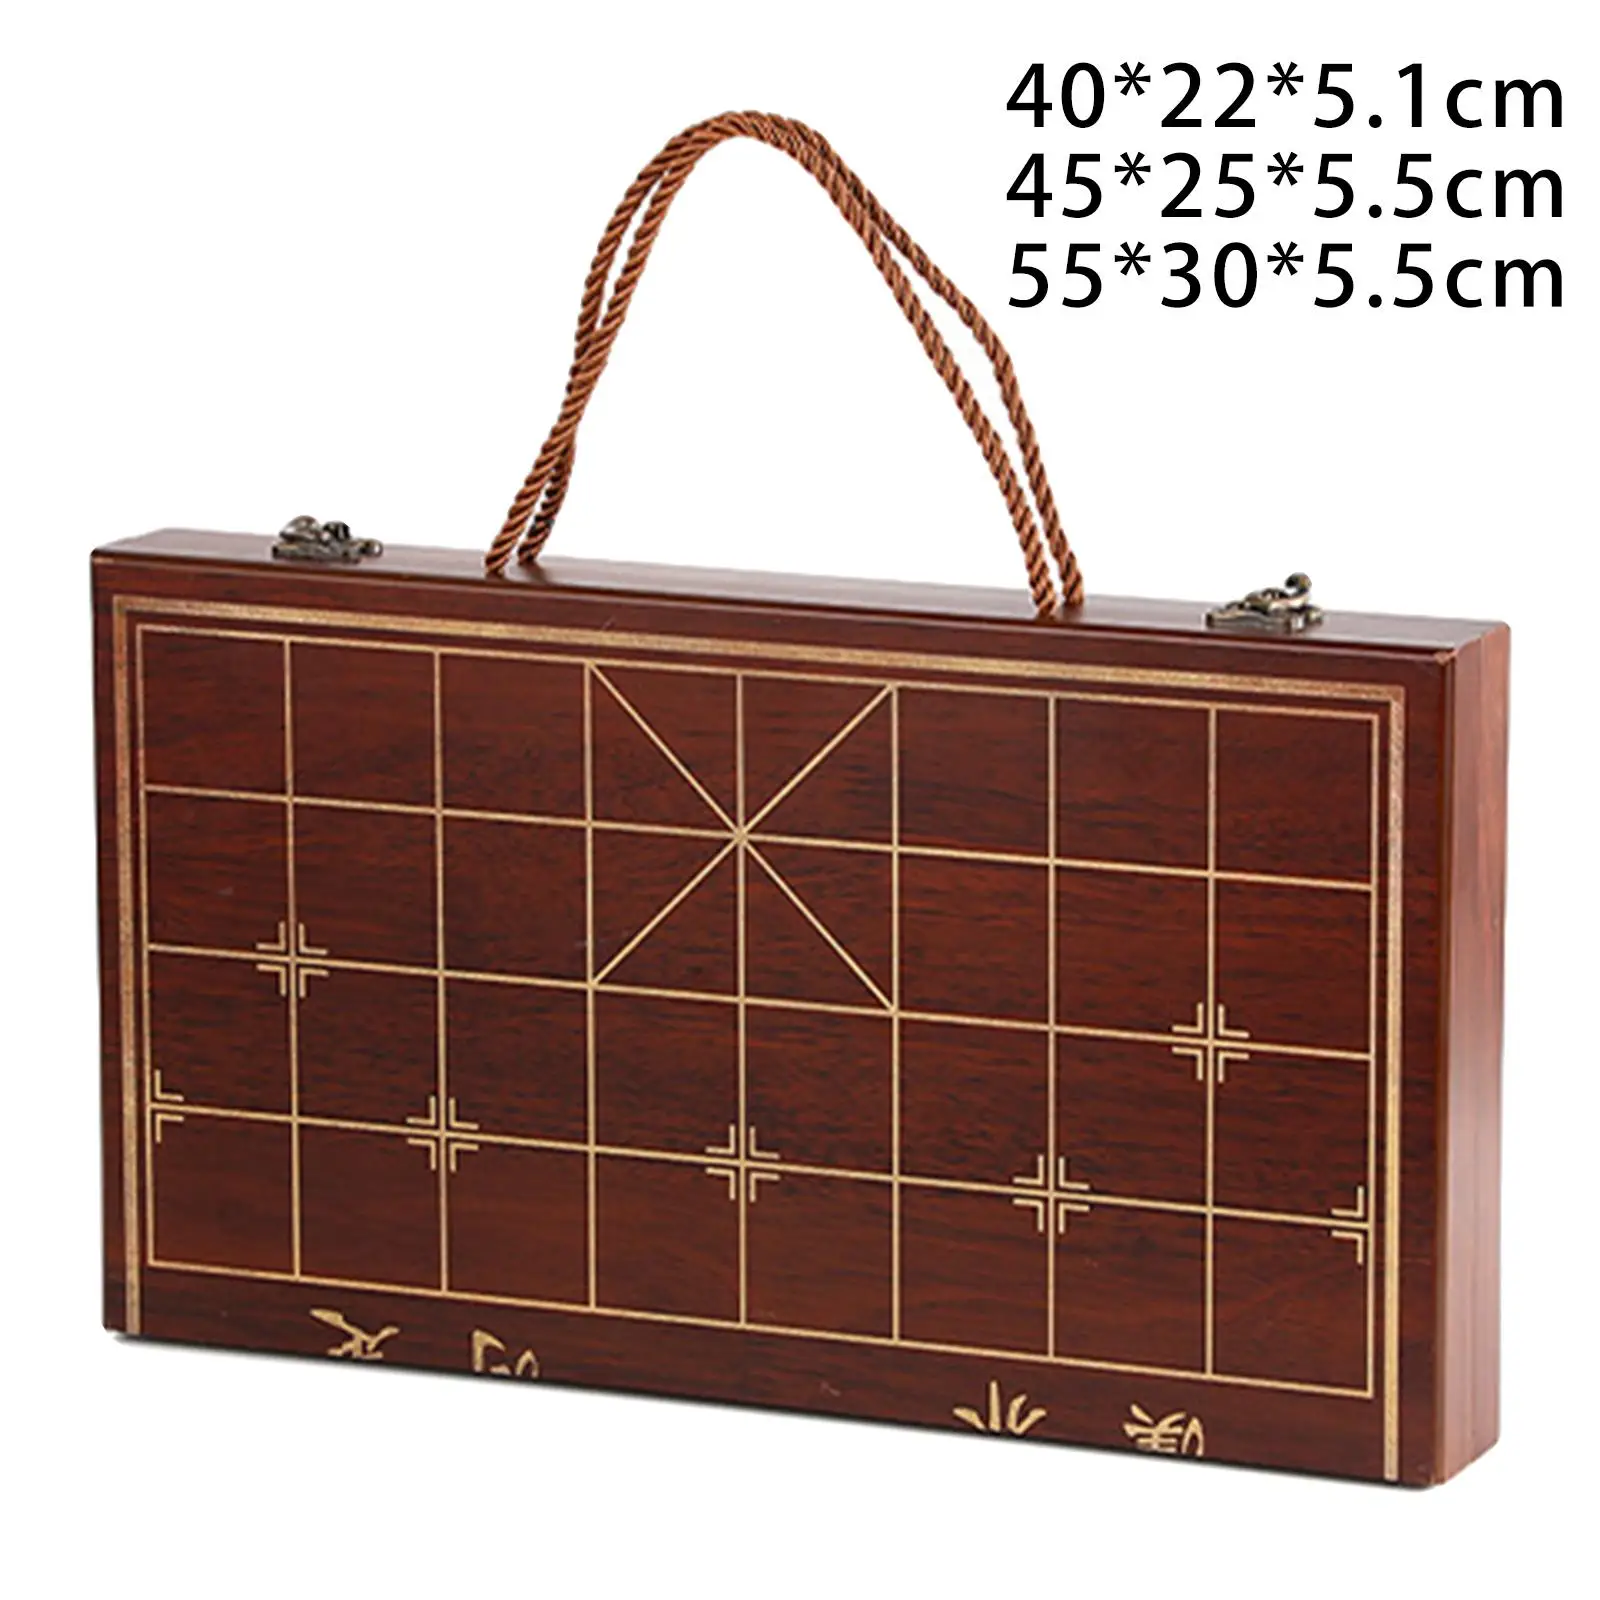 Wooden Chess Board Portable Without Pieces 2 in 1 Chinese Chess Xiangqi Board